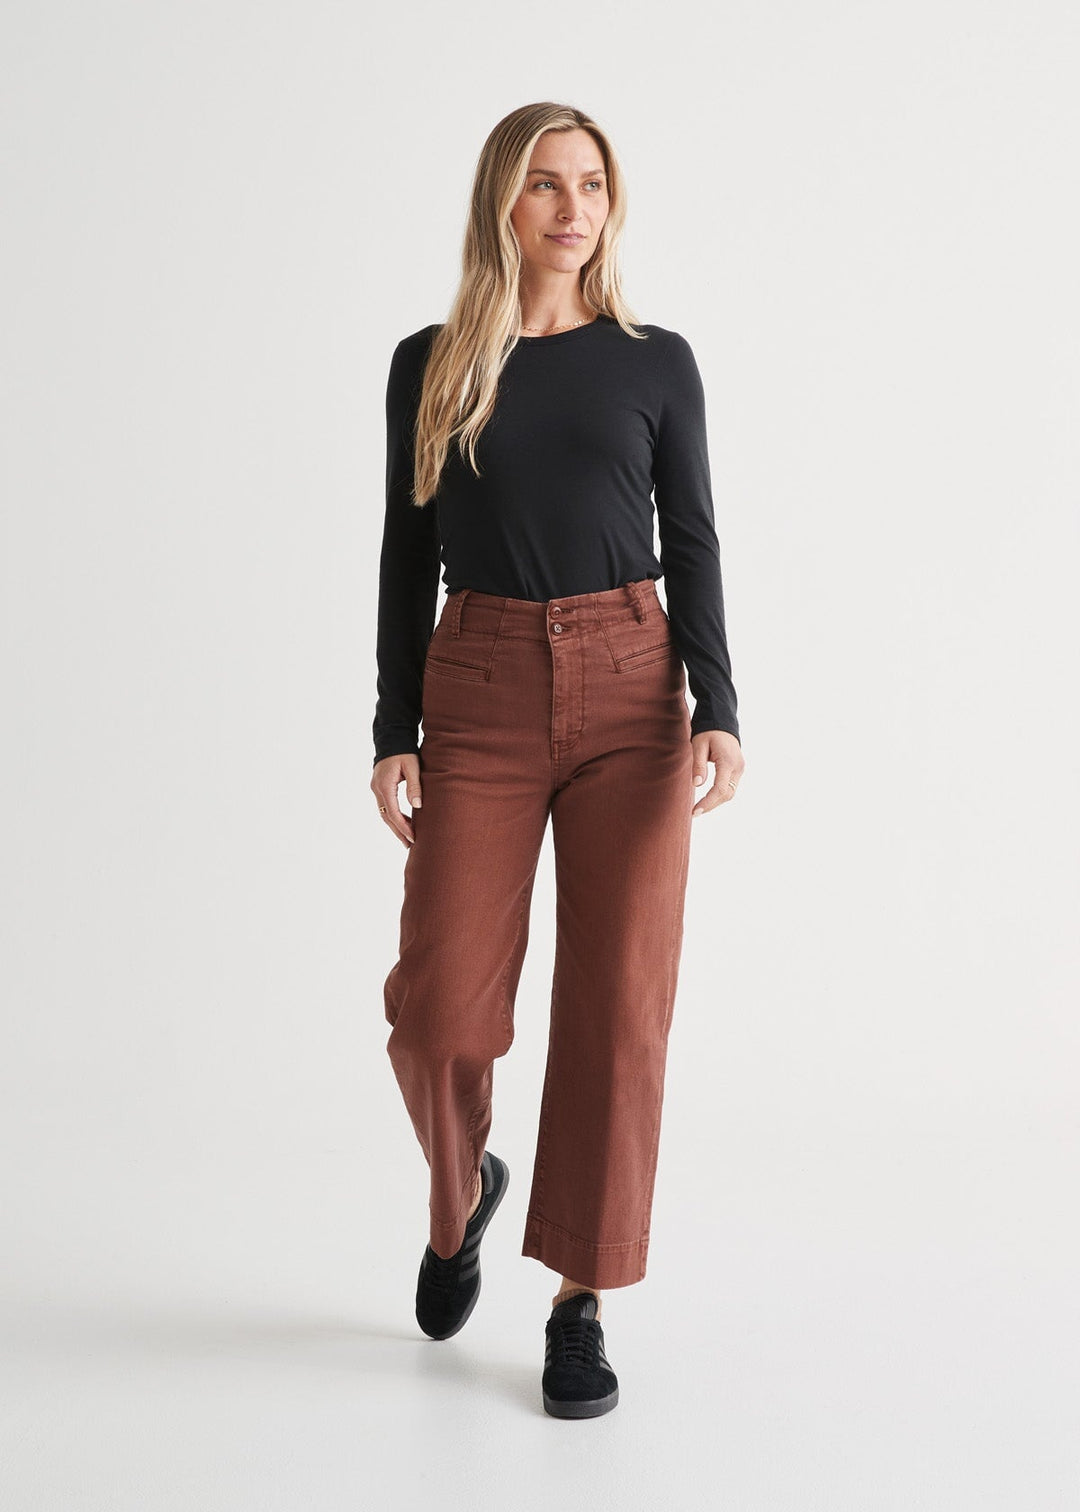 Buy Blue & Black Trousers & Pants for Women by Kryptic Online